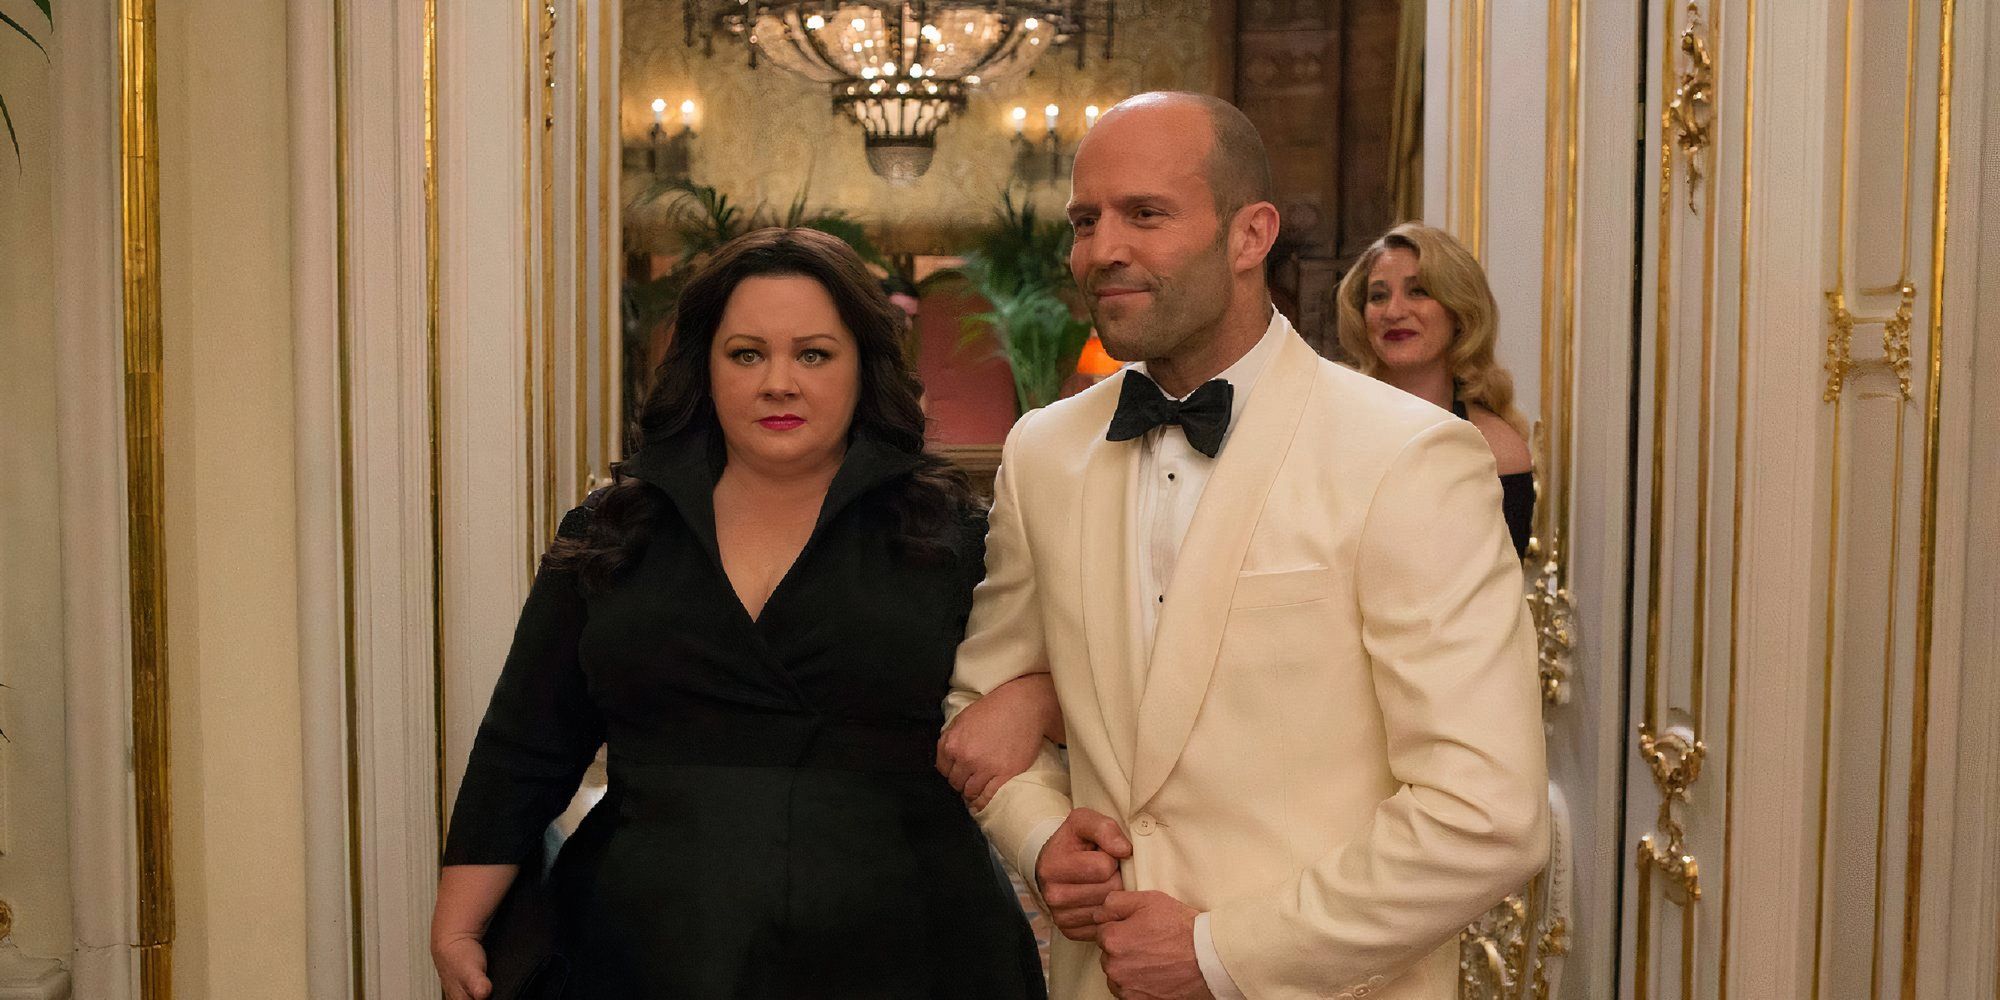 Melissa McCarthy as Susan Cooper holding onto Jason Statham as Rick Ford as the two walk side by side at a party in Spy.